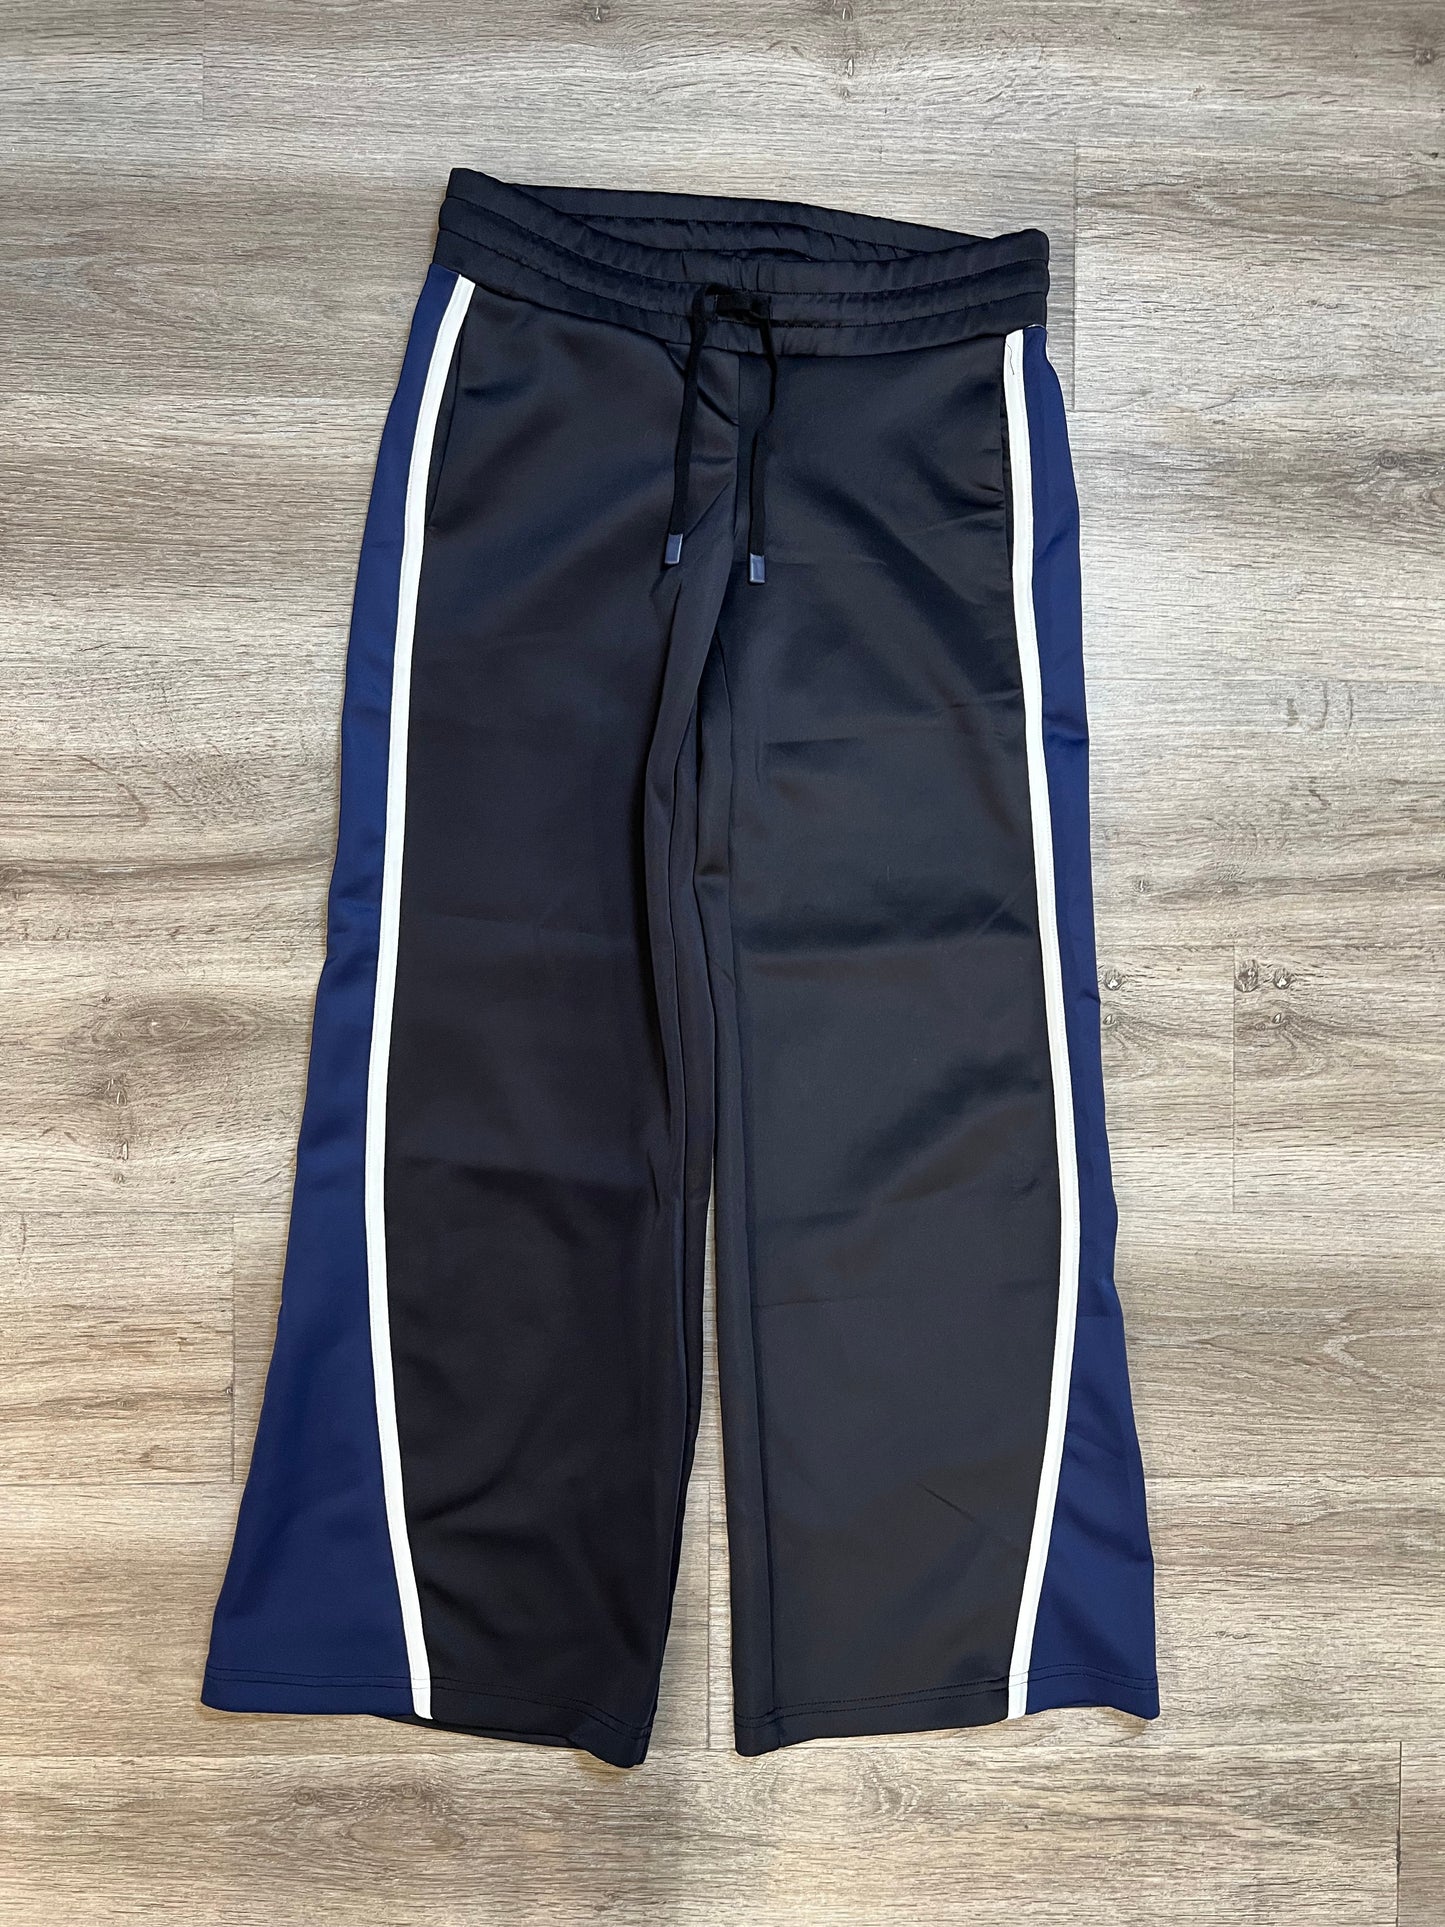 Athletic Pants By Tretorn  Size: M